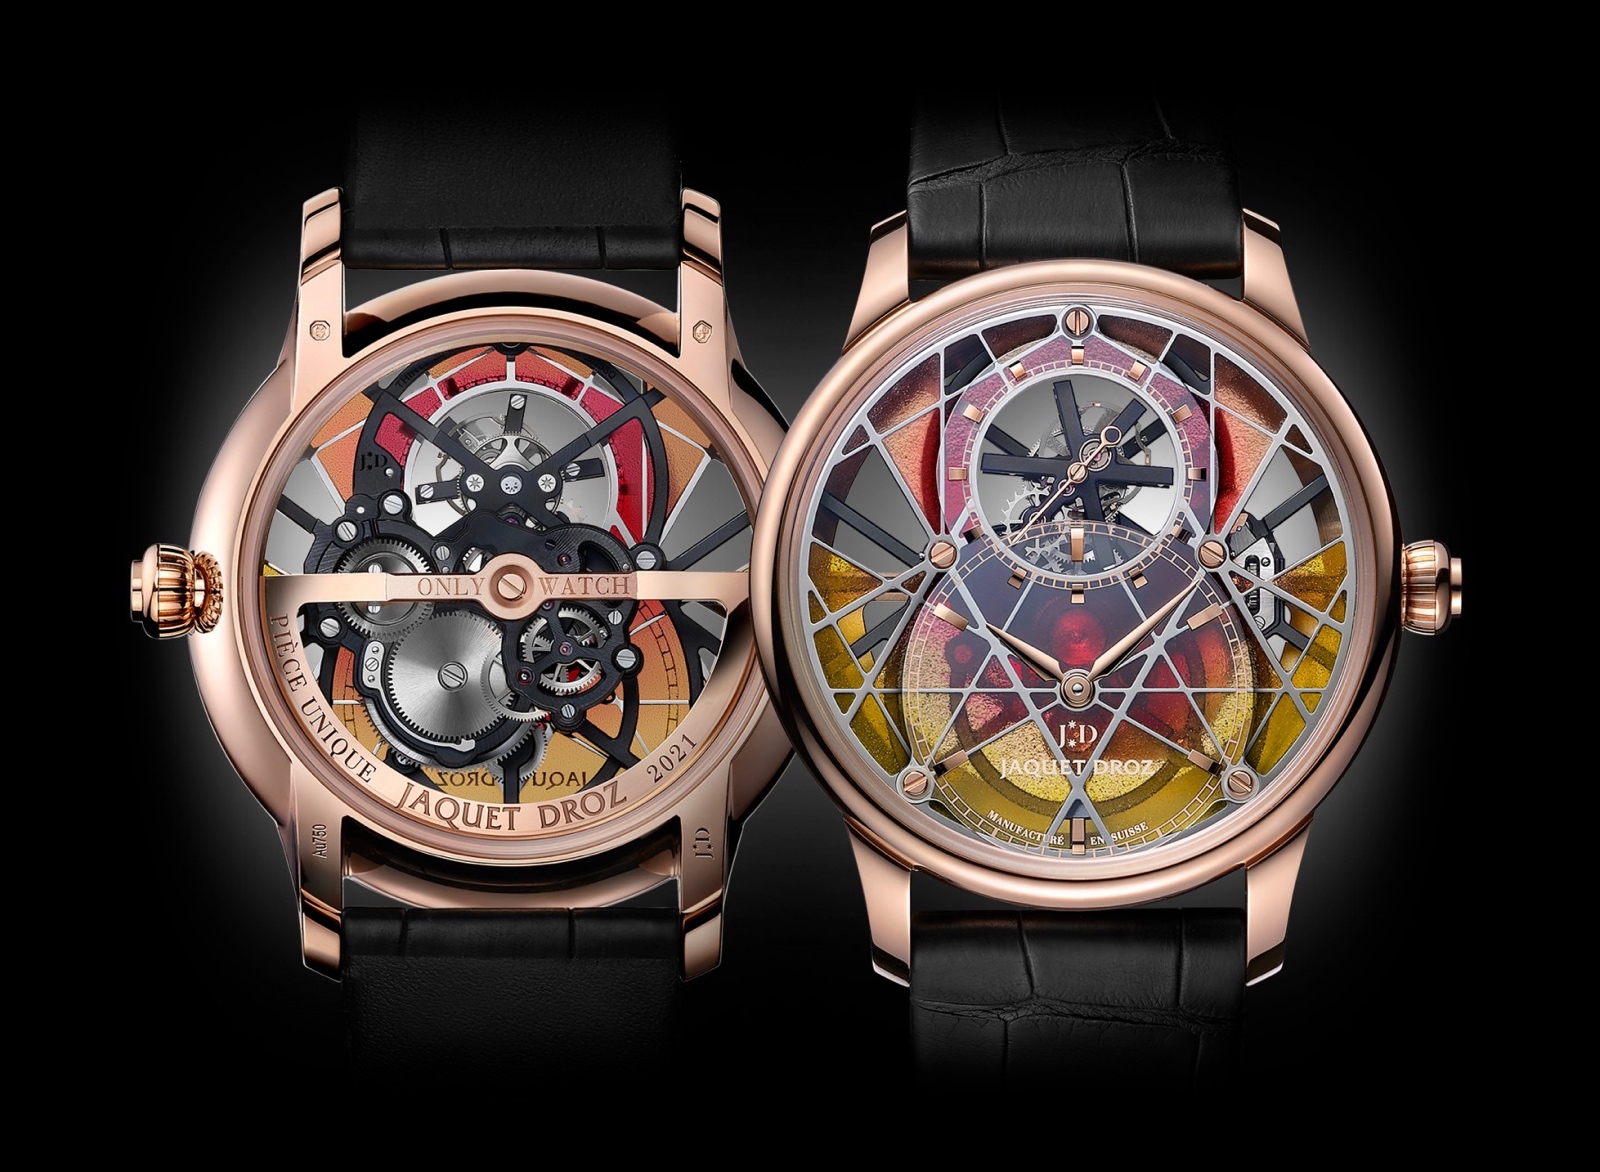 Jaquet Droz Grande Seconde Tourbillon Skelet One Only Watch 2021 - duo